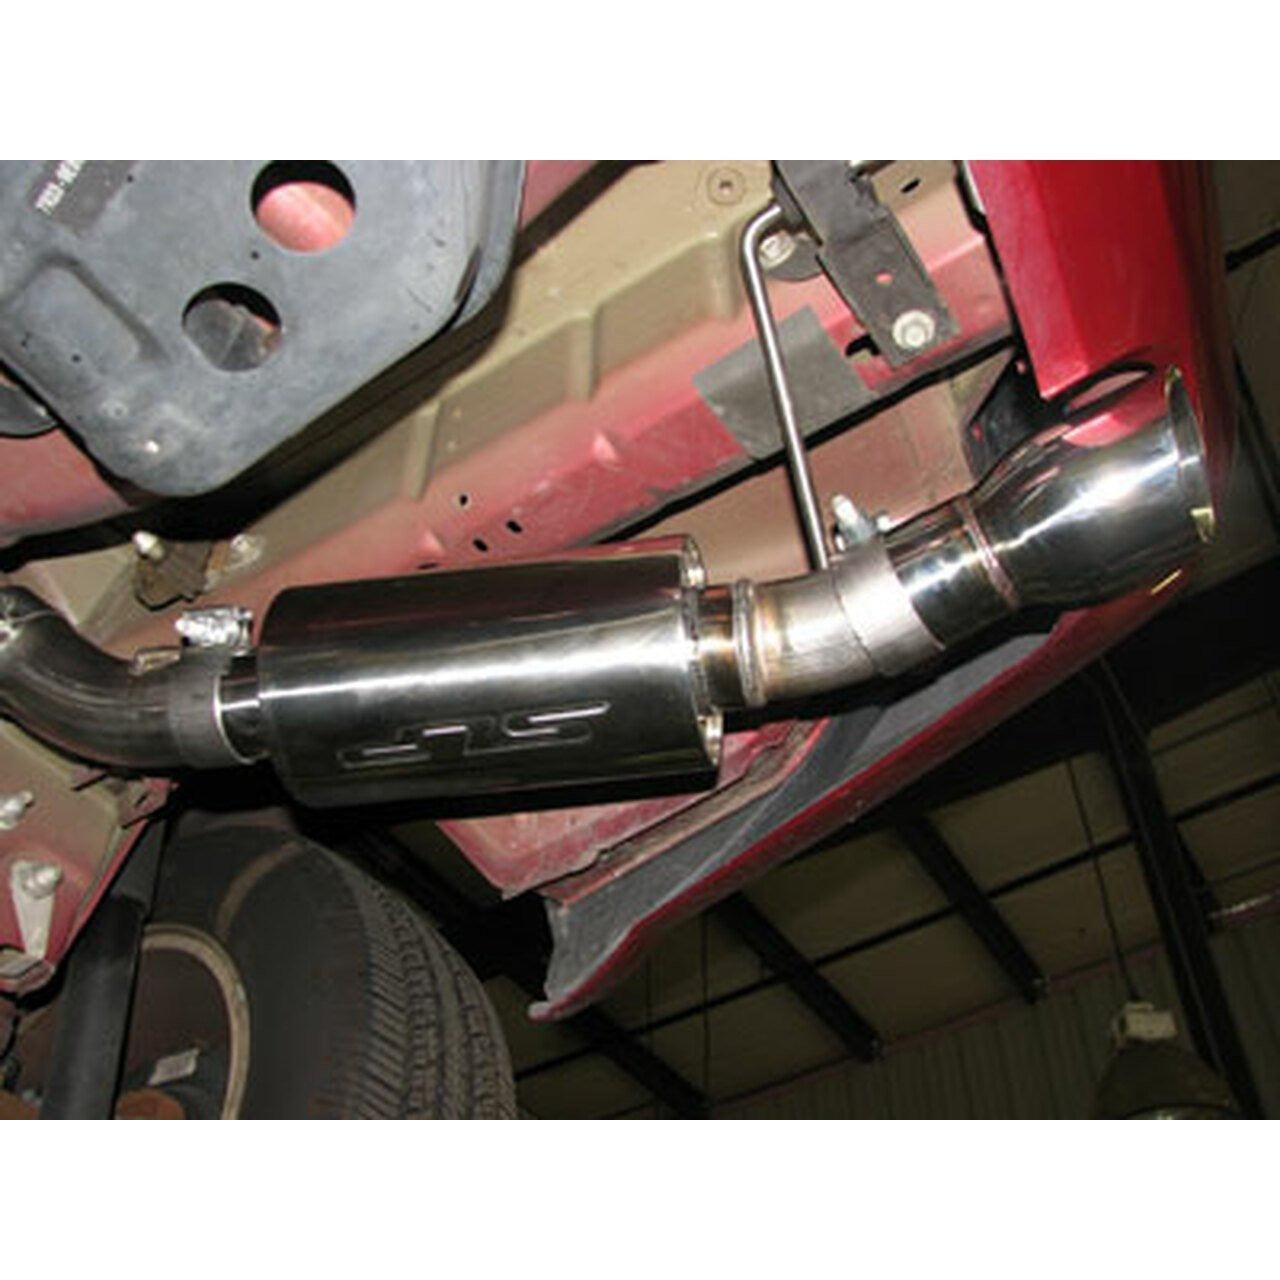 SLP 2005-2010 Ford Mustang 4.0L LoudMouth Axle-Back Exhaust w/ 3.5in Tip - SMINKpower Performance Parts SLPM31021 SLP